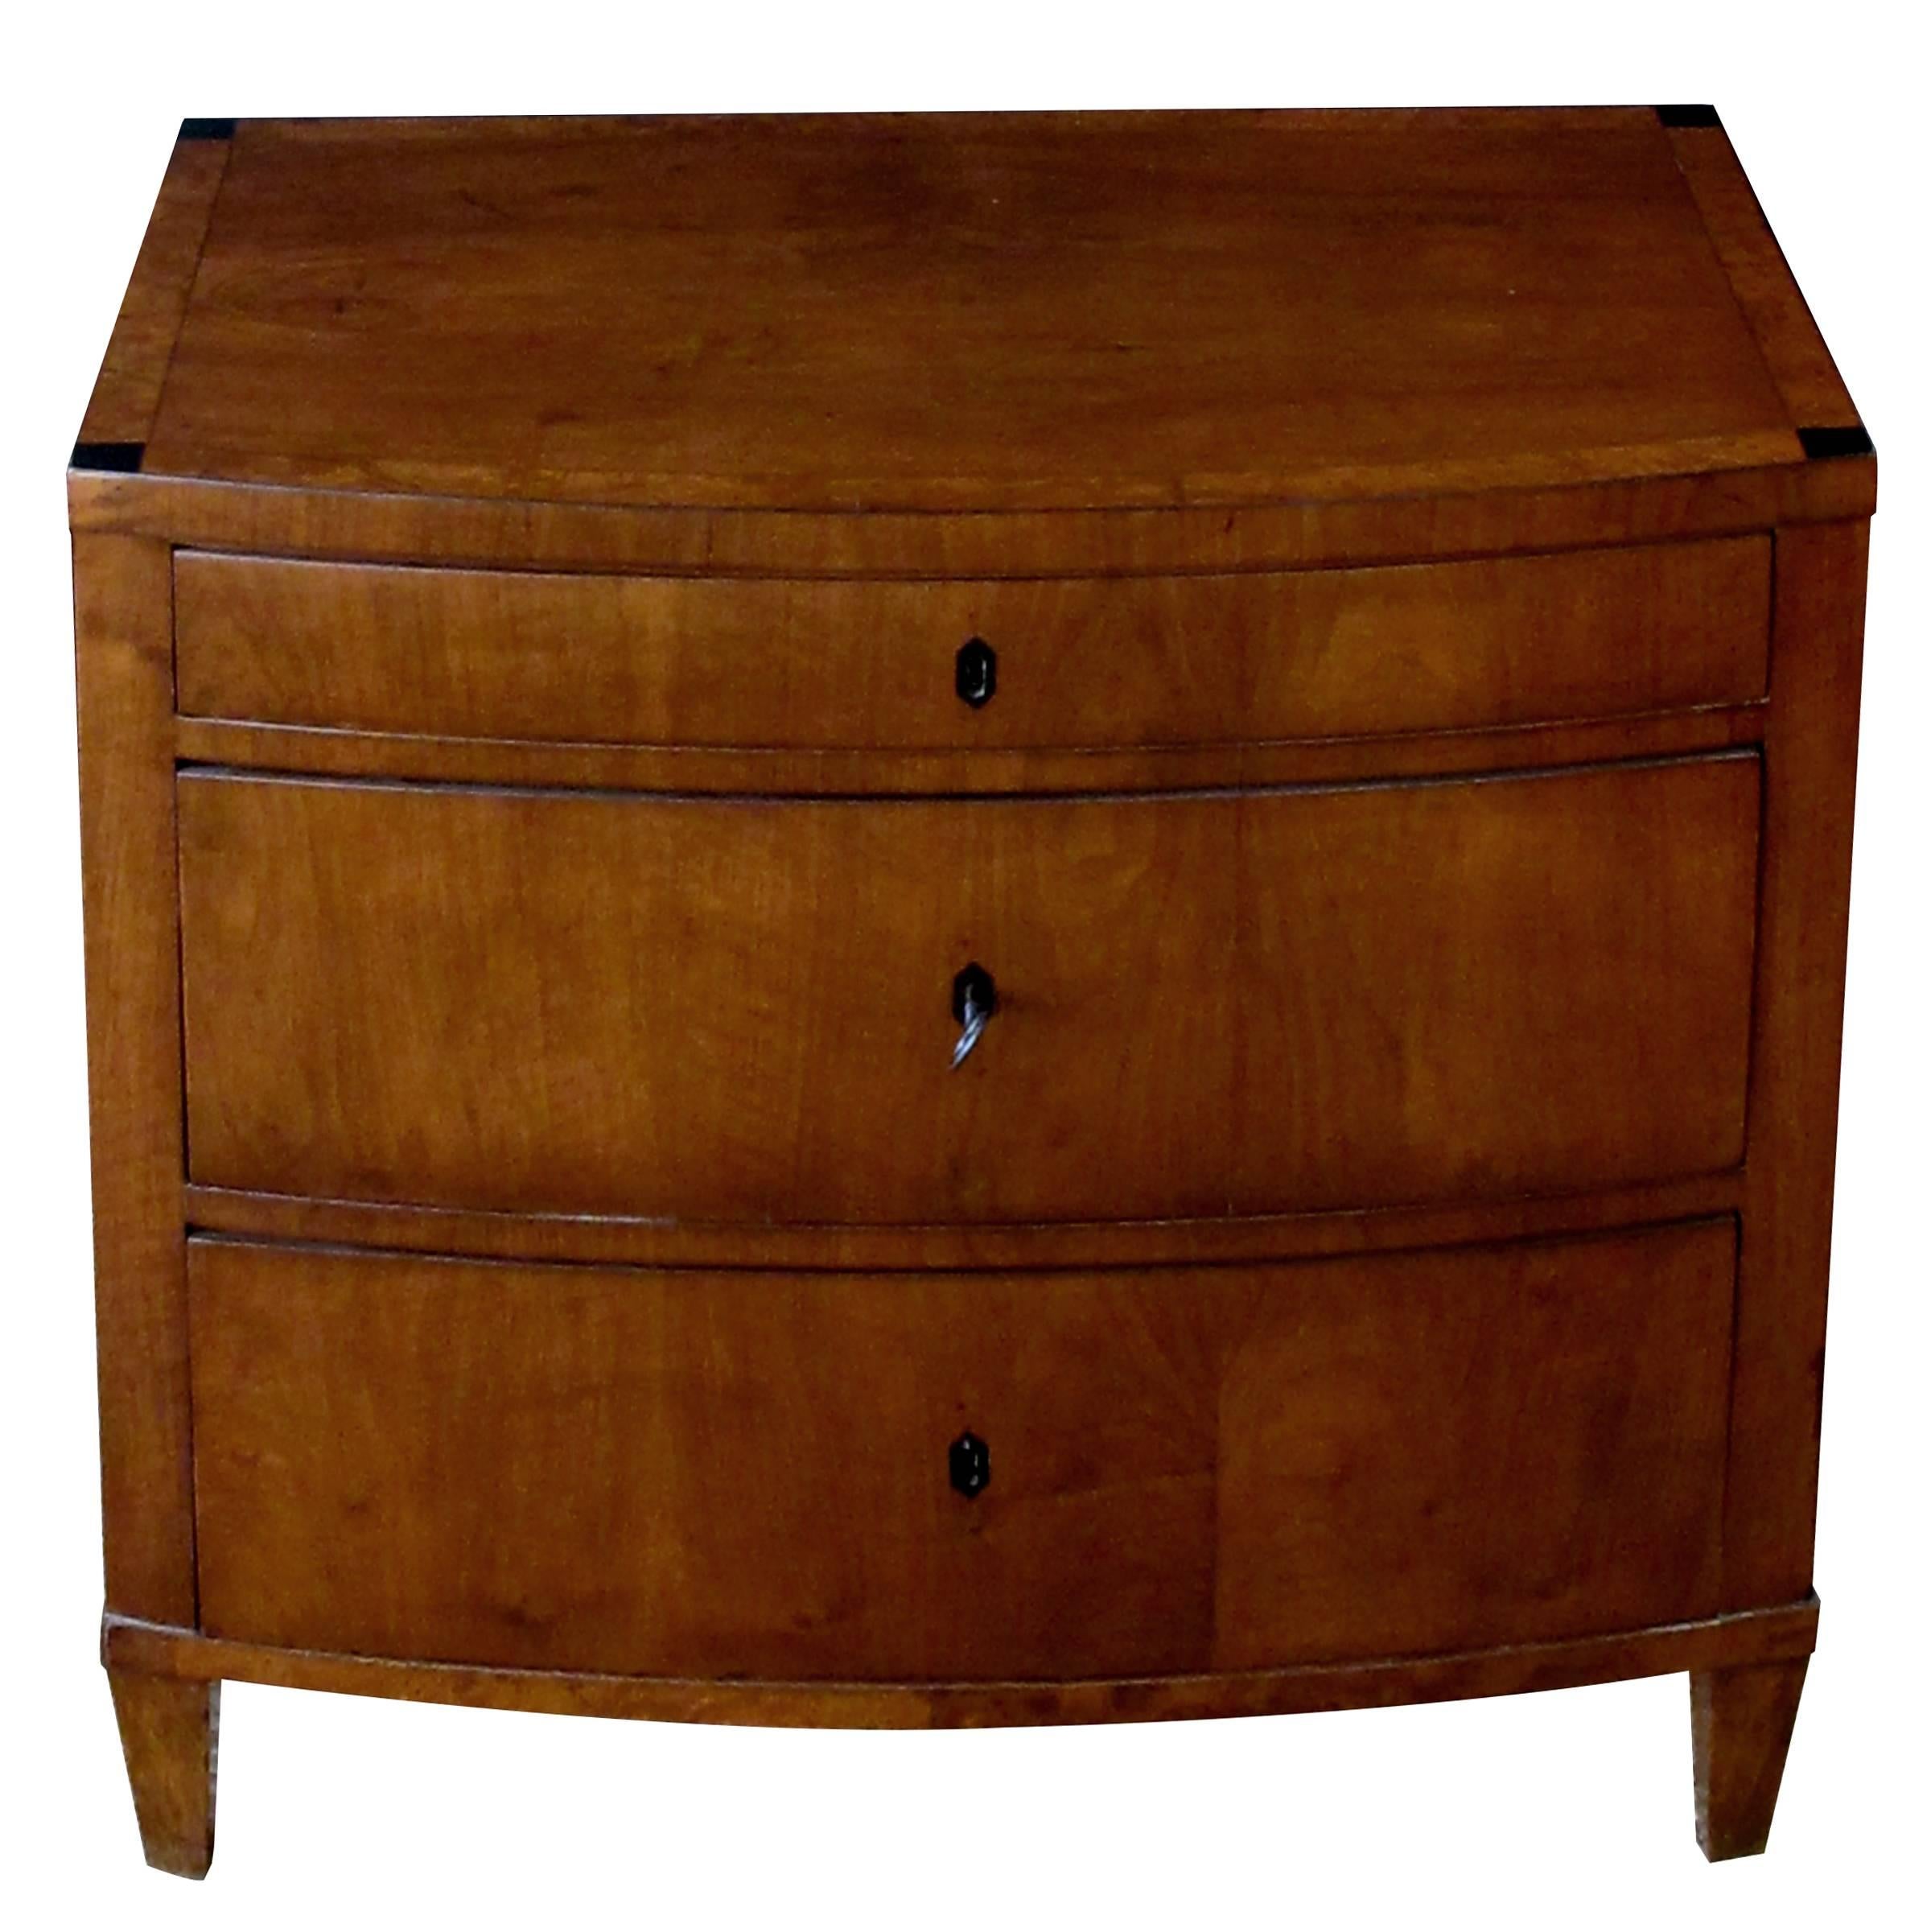 A Handsome Danish Empire 3-Drawer Walnut Bow-Front Commode/Chest w Burlwood Trim